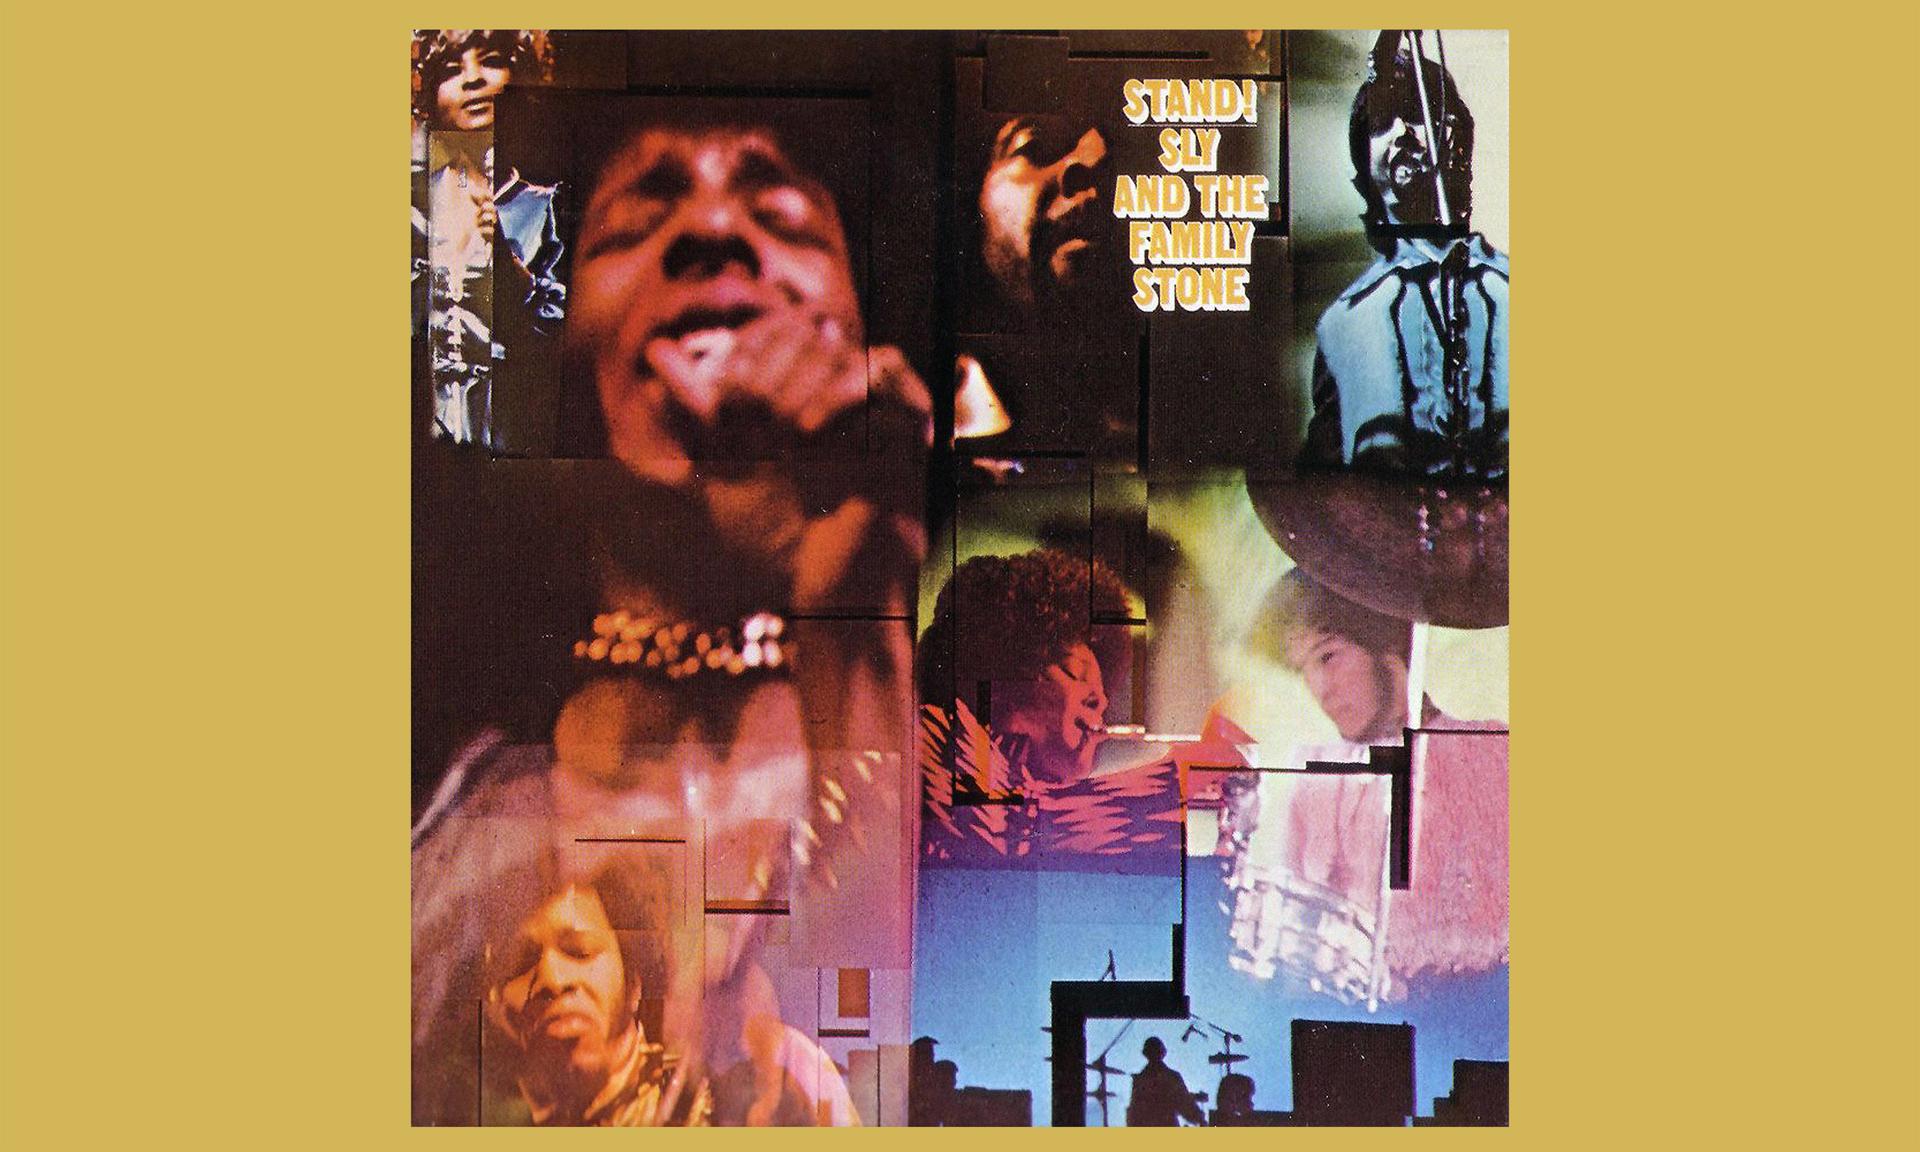 "Stand!" by Sly and the Family Stone